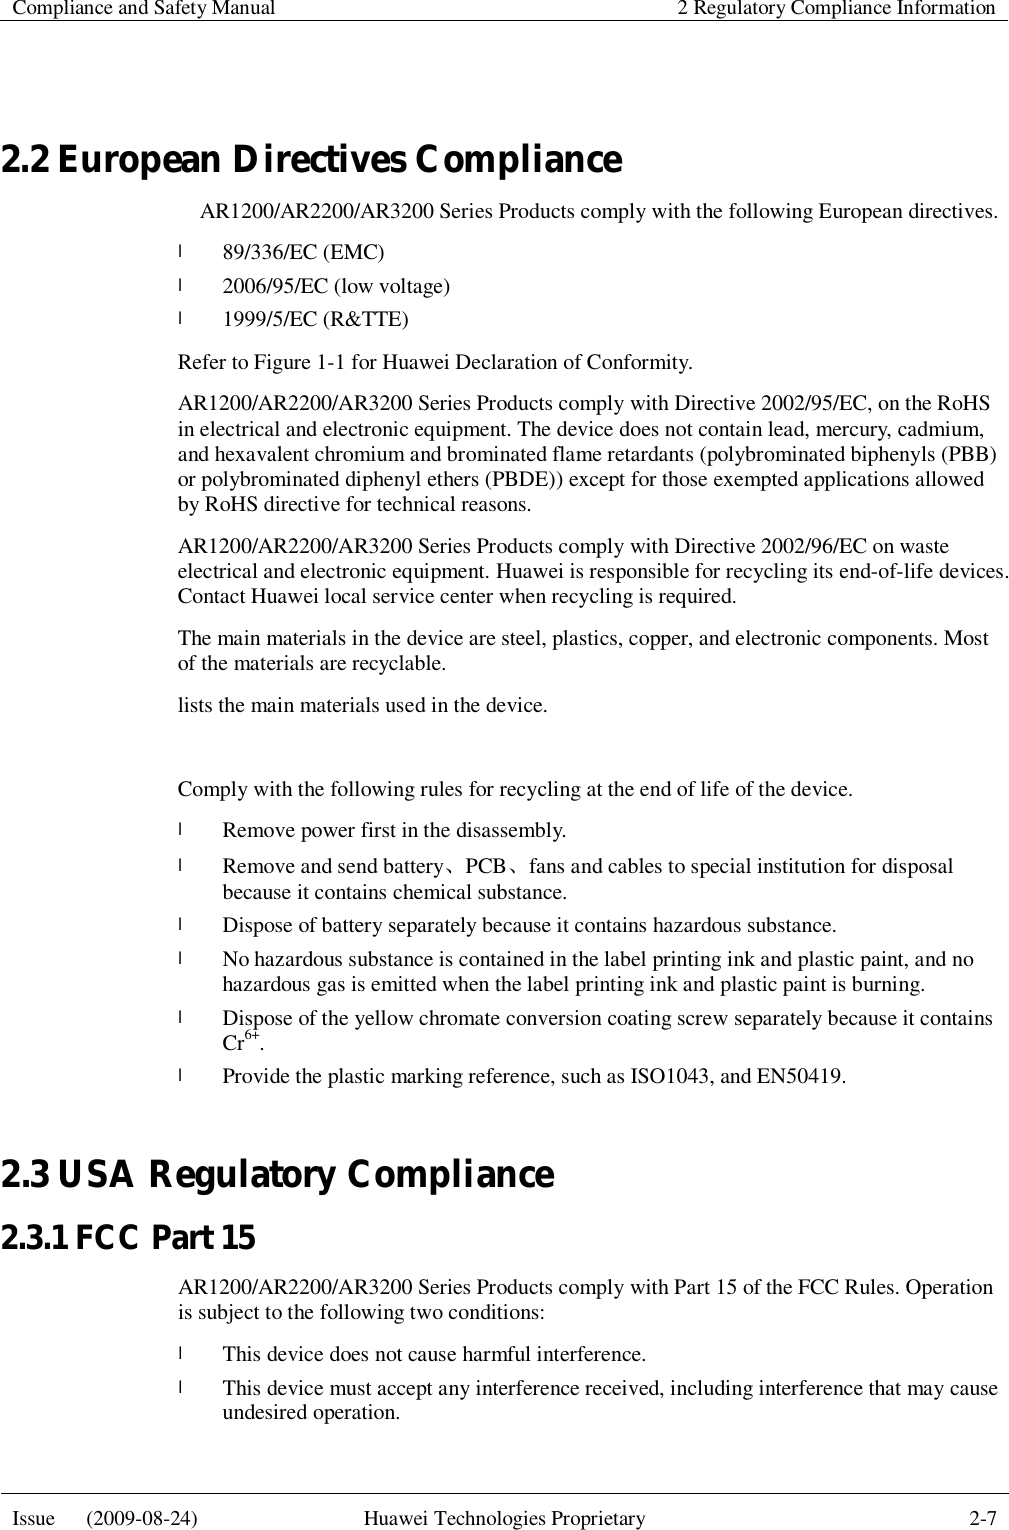  Compliance and Safety Manual  2 Regulatory Compliance Information  Issue   (2009-08-24)  Huawei Technologies Proprietary  2-7   2.2 European Directives Compliance   AR1200/AR2200/AR3200 Series Products comply with the following European directives.  l 89/336/EC (EMC) l 2006/95/EC (low voltage) l 1999/5/EC (R&amp;TTE) Refer to Figure 1-1 for Huawei Declaration of Conformity. AR1200/AR2200/AR3200 Series Products comply with Directive 2002/95/EC, on the RoHS in electrical and electronic equipment. The device does not contain lead, mercury, cadmium, and hexavalent chromium and brominated flame retardants (polybrominated biphenyls (PBB) or polybrominated diphenyl ethers (PBDE)) except for those exempted applications allowed by RoHS directive for technical reasons. AR1200/AR2200/AR3200 Series Products comply with Directive 2002/96/EC on waste electrical and electronic equipment. Huawei is responsible for recycling its end-of-life devices. Contact Huawei local service center when recycling is required. The main materials in the device are steel, plastics, copper, and electronic components. Most of the materials are recyclable. lists the main materials used in the device.  Comply with the following rules for recycling at the end of life of the device. l Remove power first in the disassembly. l Remove and send battery、PCB、fans and cables to special institution for disposal because it contains chemical substance. l Dispose of battery separately because it contains hazardous substance. l No hazardous substance is contained in the label printing ink and plastic paint, and no hazardous gas is emitted when the label printing ink and plastic paint is burning. l Dispose of the yellow chromate conversion coating screw separately because it contains Cr6+. l Provide the plastic marking reference, such as ISO1043, and EN50419. 2.3 USA Regulatory Compliance 2.3.1 FCC Part 15 AR1200/AR2200/AR3200 Series Products comply with Part 15 of the FCC Rules. Operation is subject to the following two conditions: l This device does not cause harmful interference. l This device must accept any interference received, including interference that may cause undesired operation. 